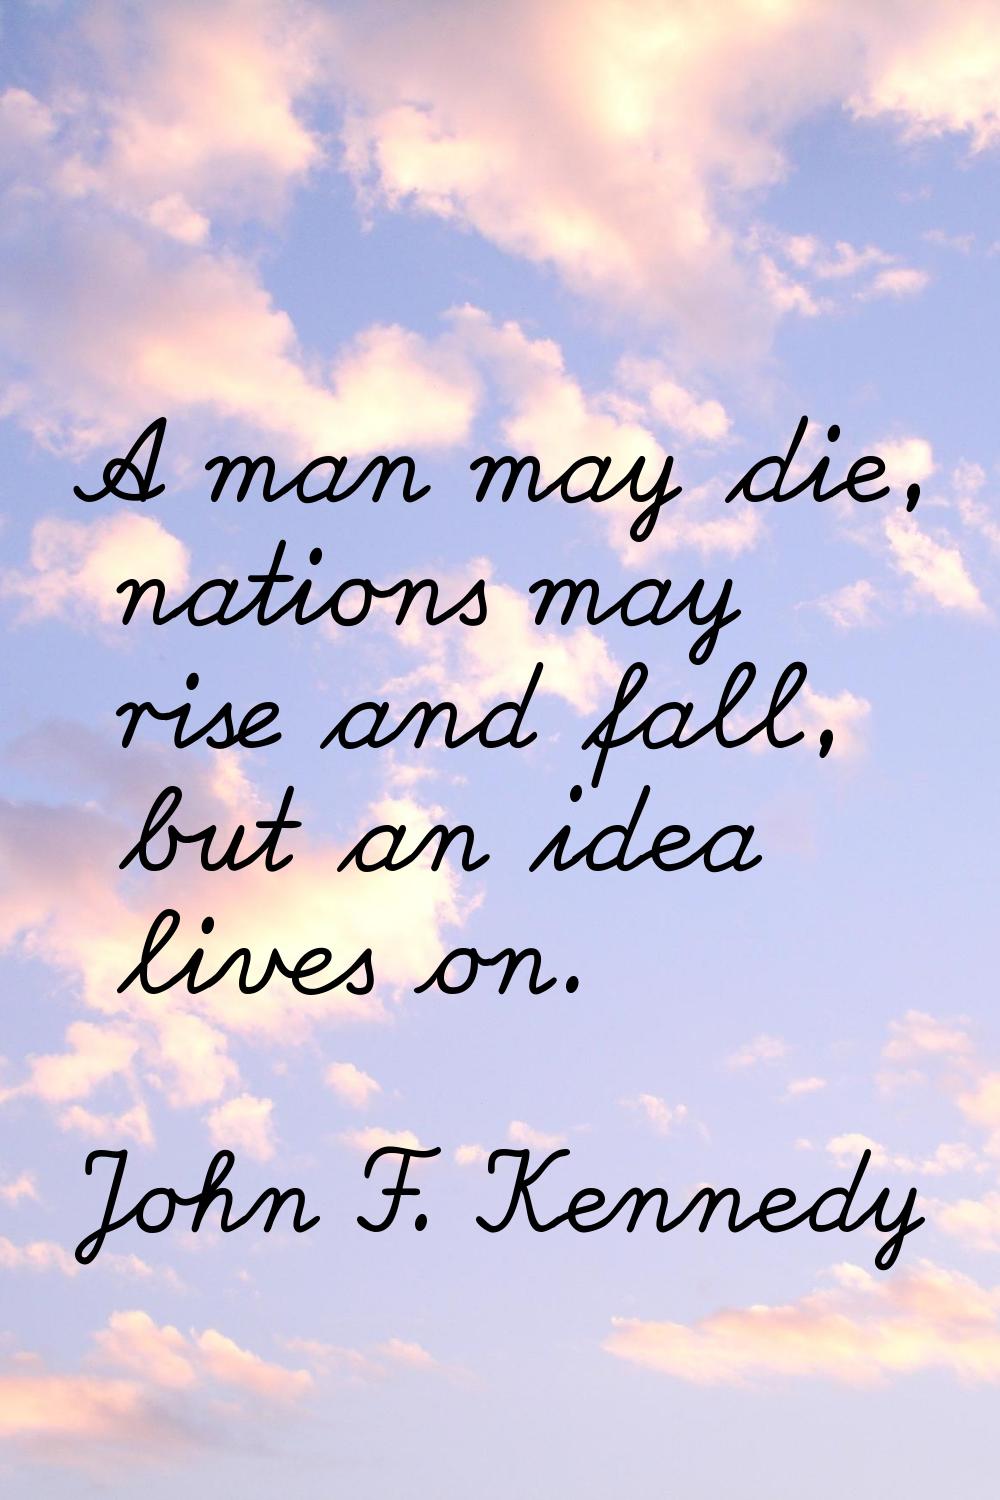 A man may die, nations may rise and fall, but an idea lives on.